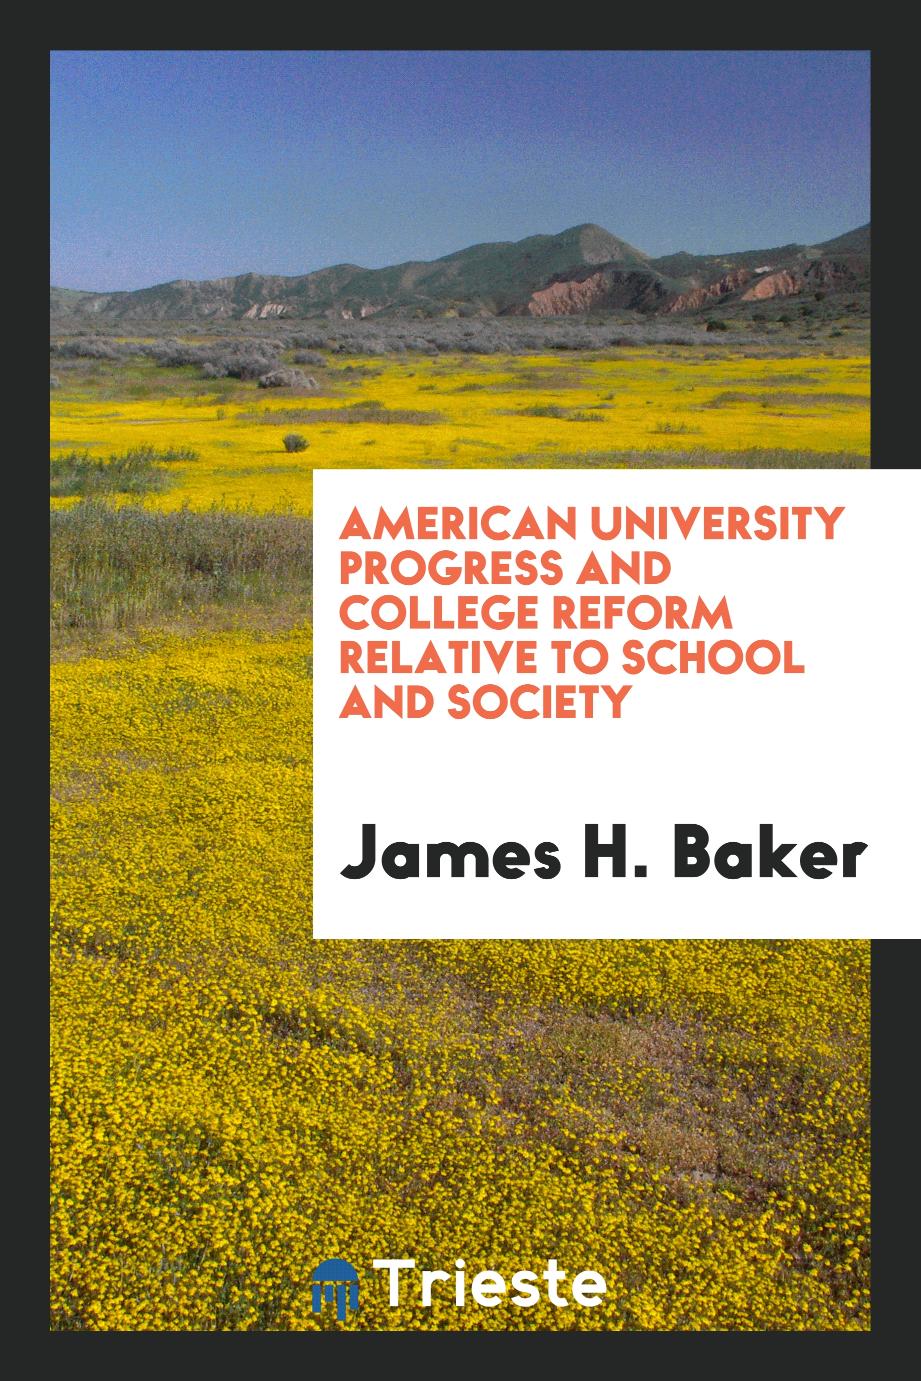 American university progress and college reform relative to school and society